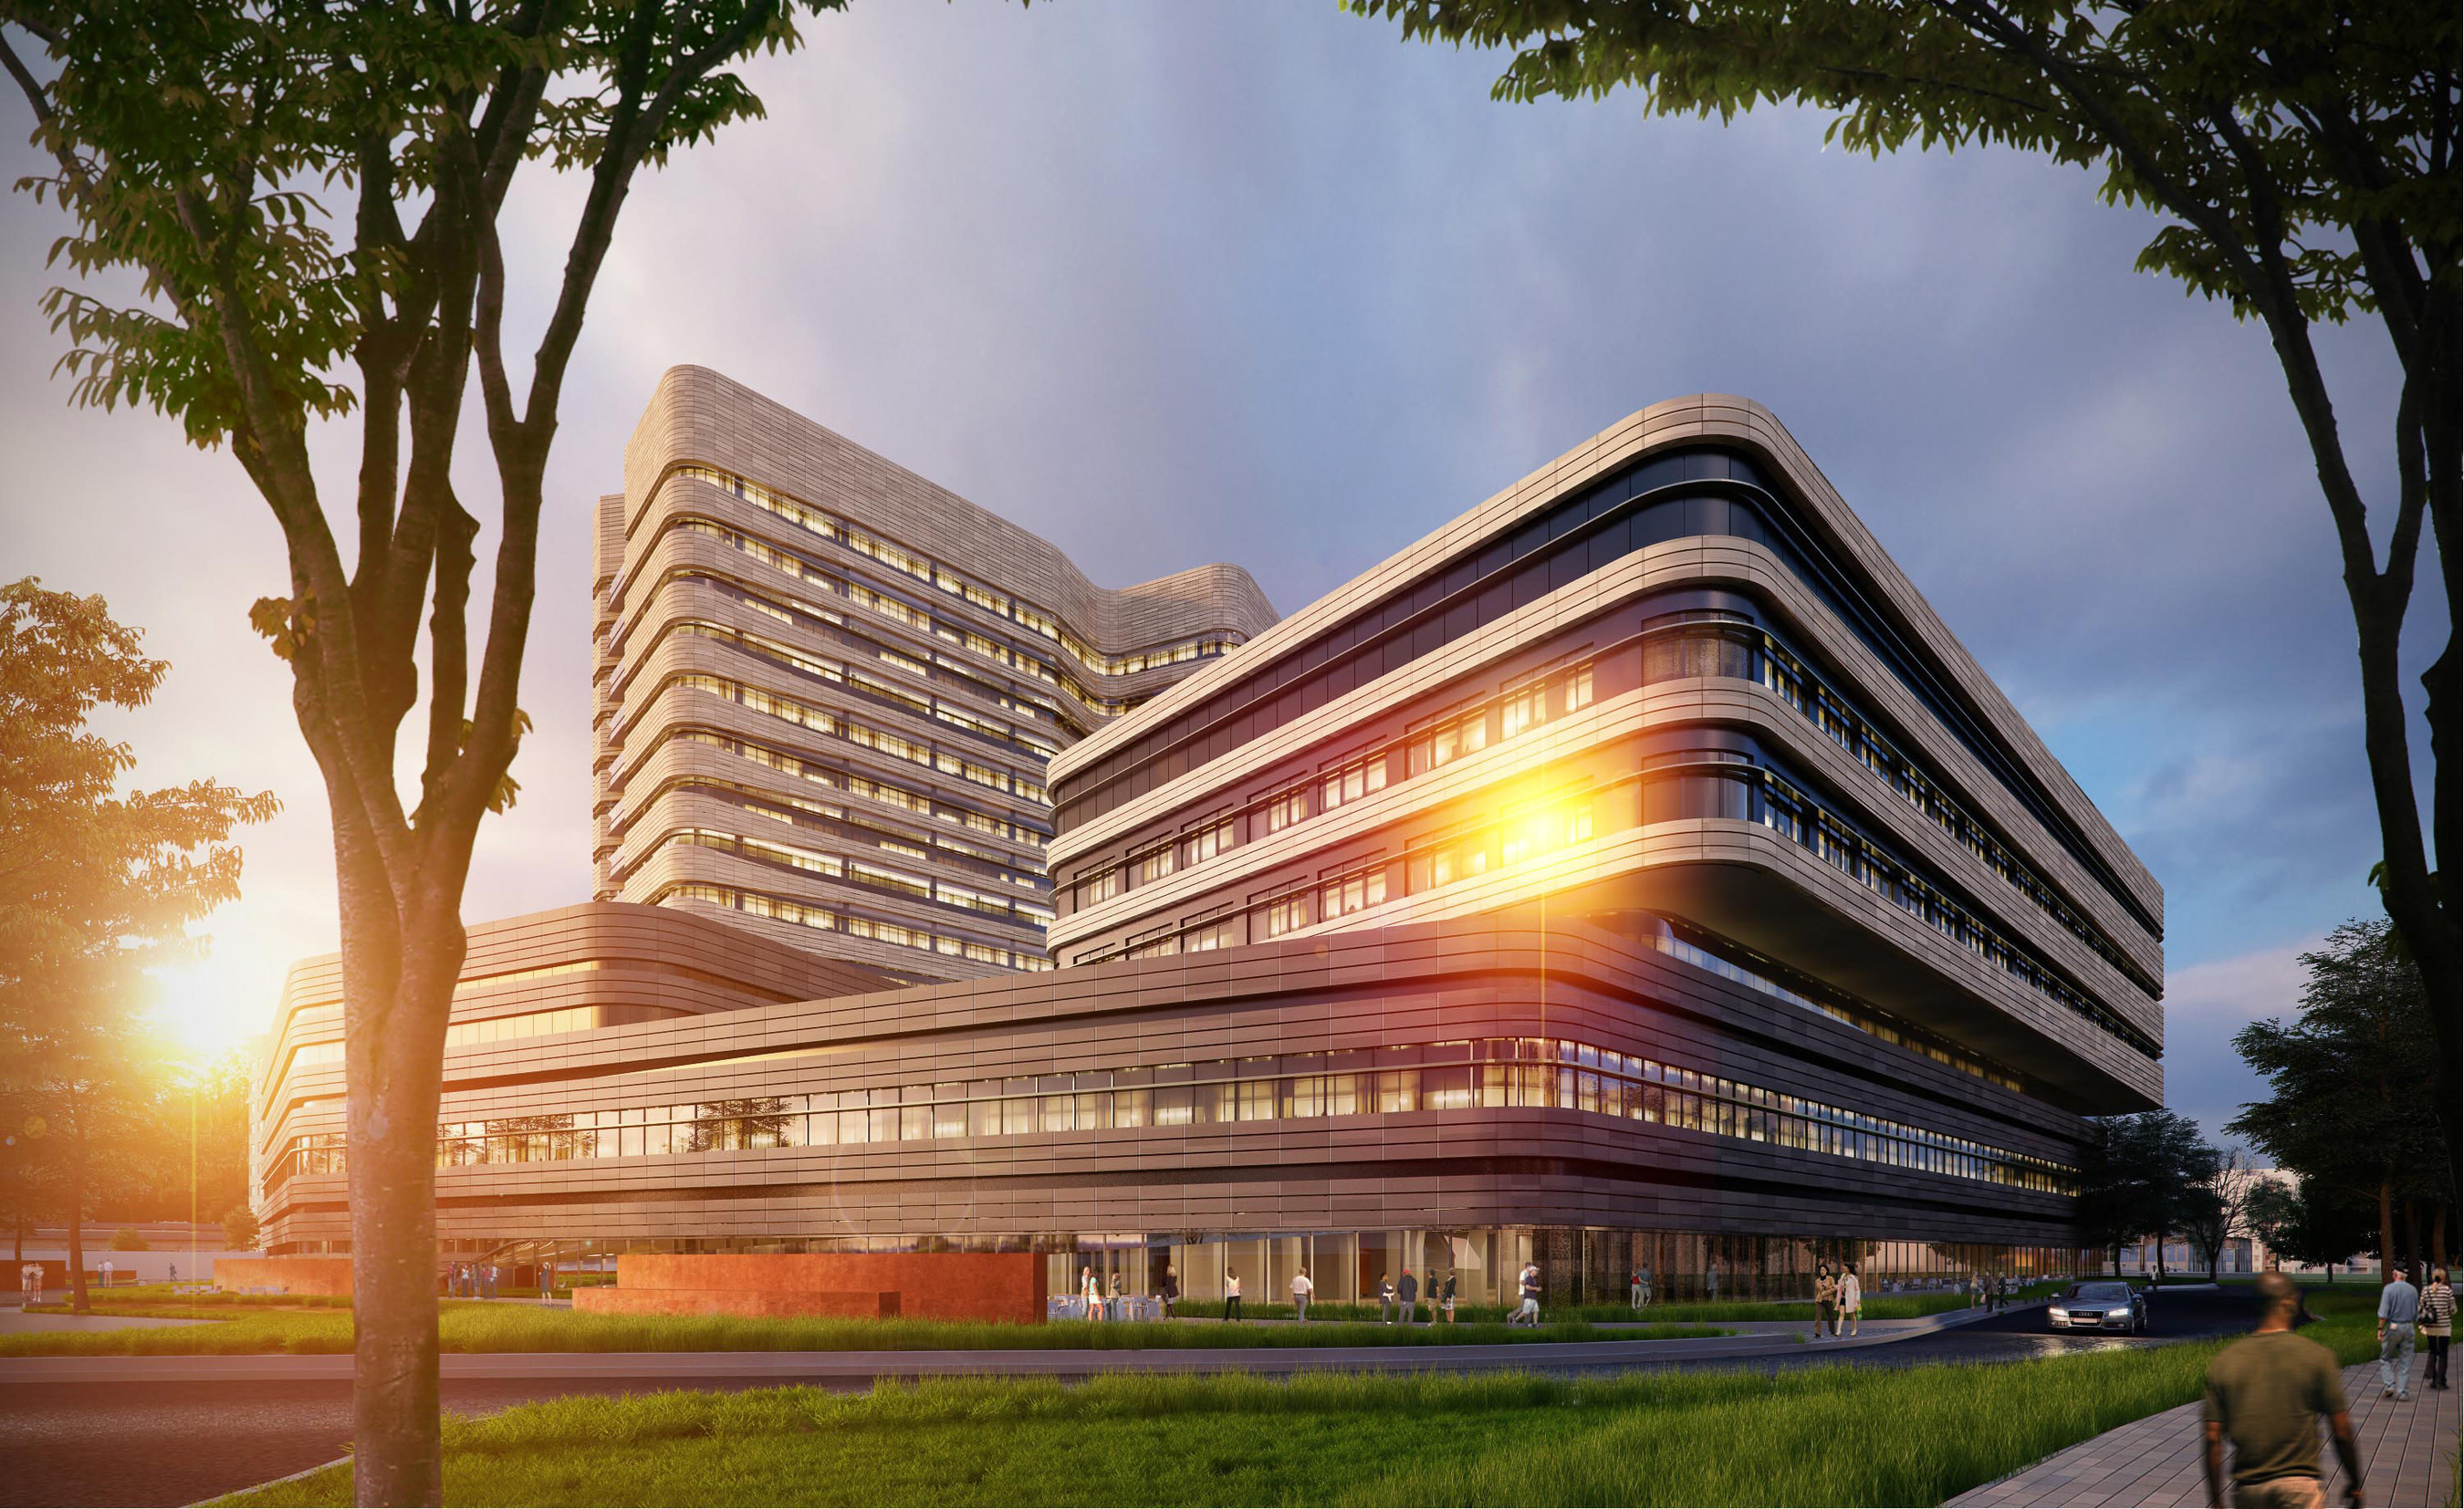 Rendering of the 500-bed tertiary care Shanghai Jiahui International Hospital expected to open in 2017